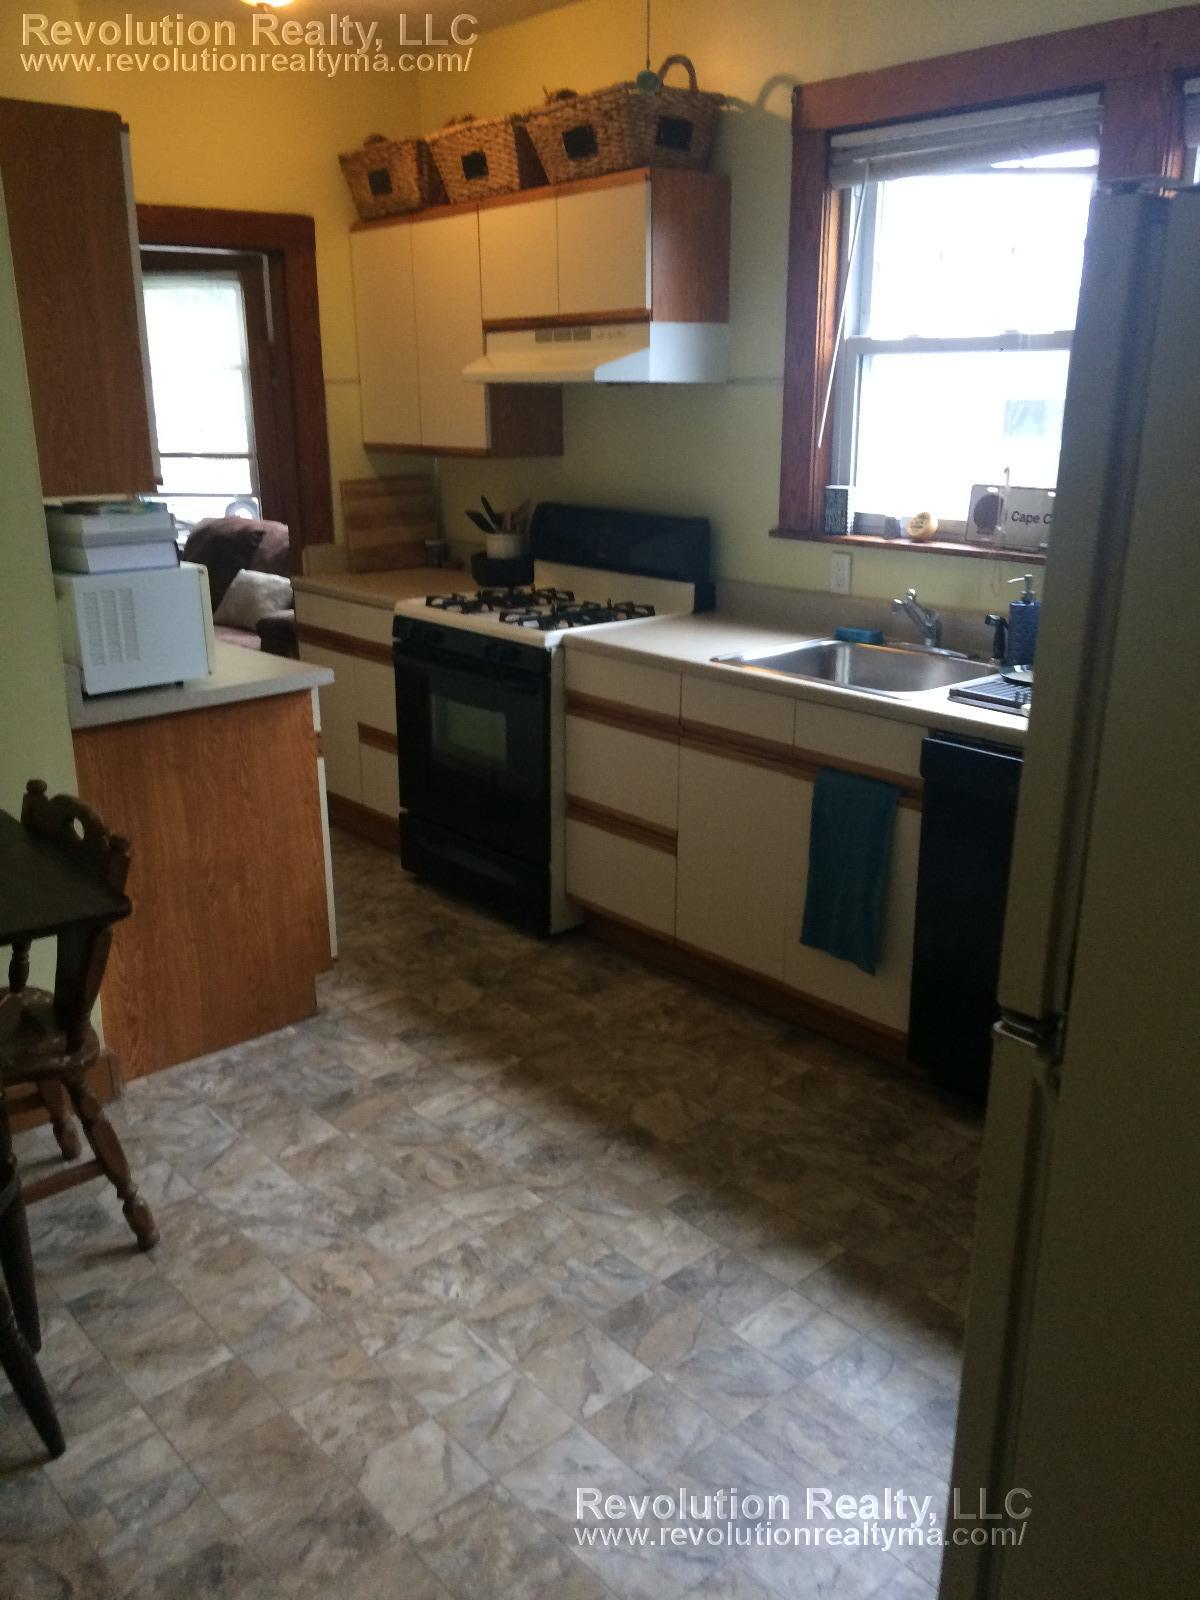 Photos of apartment on Quincy St.,Medford MA 02155